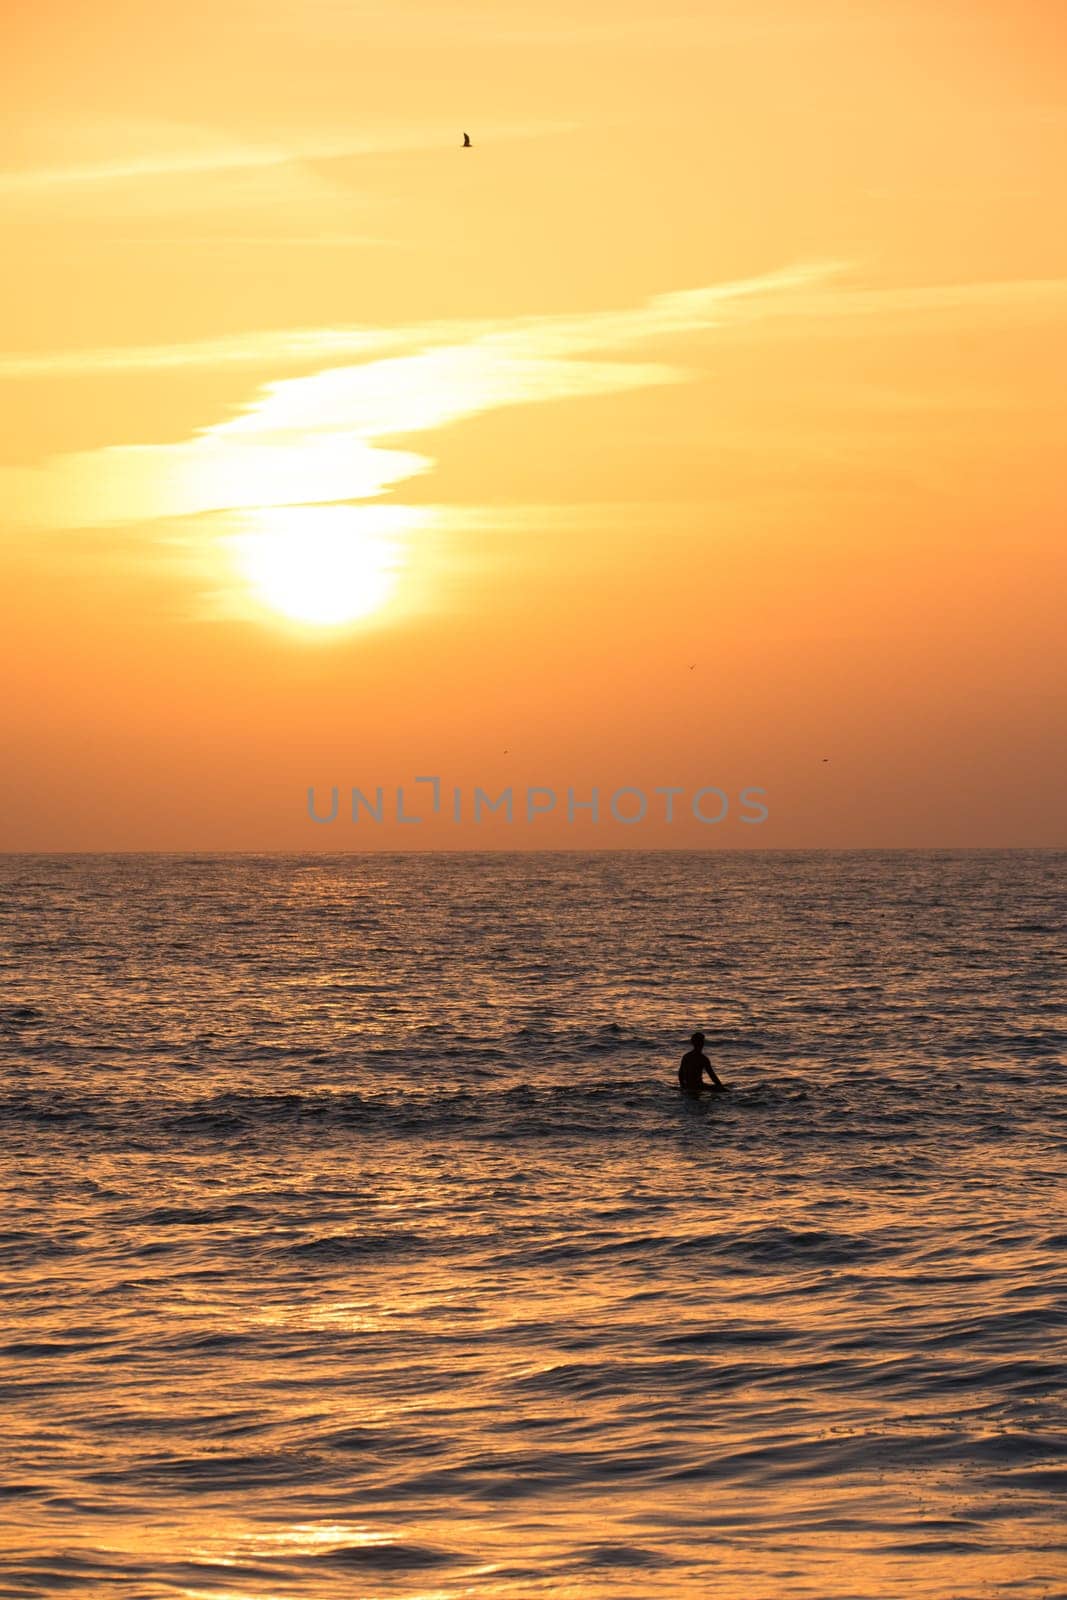 Surfer silhouette in the ocean at sunset by homydesign